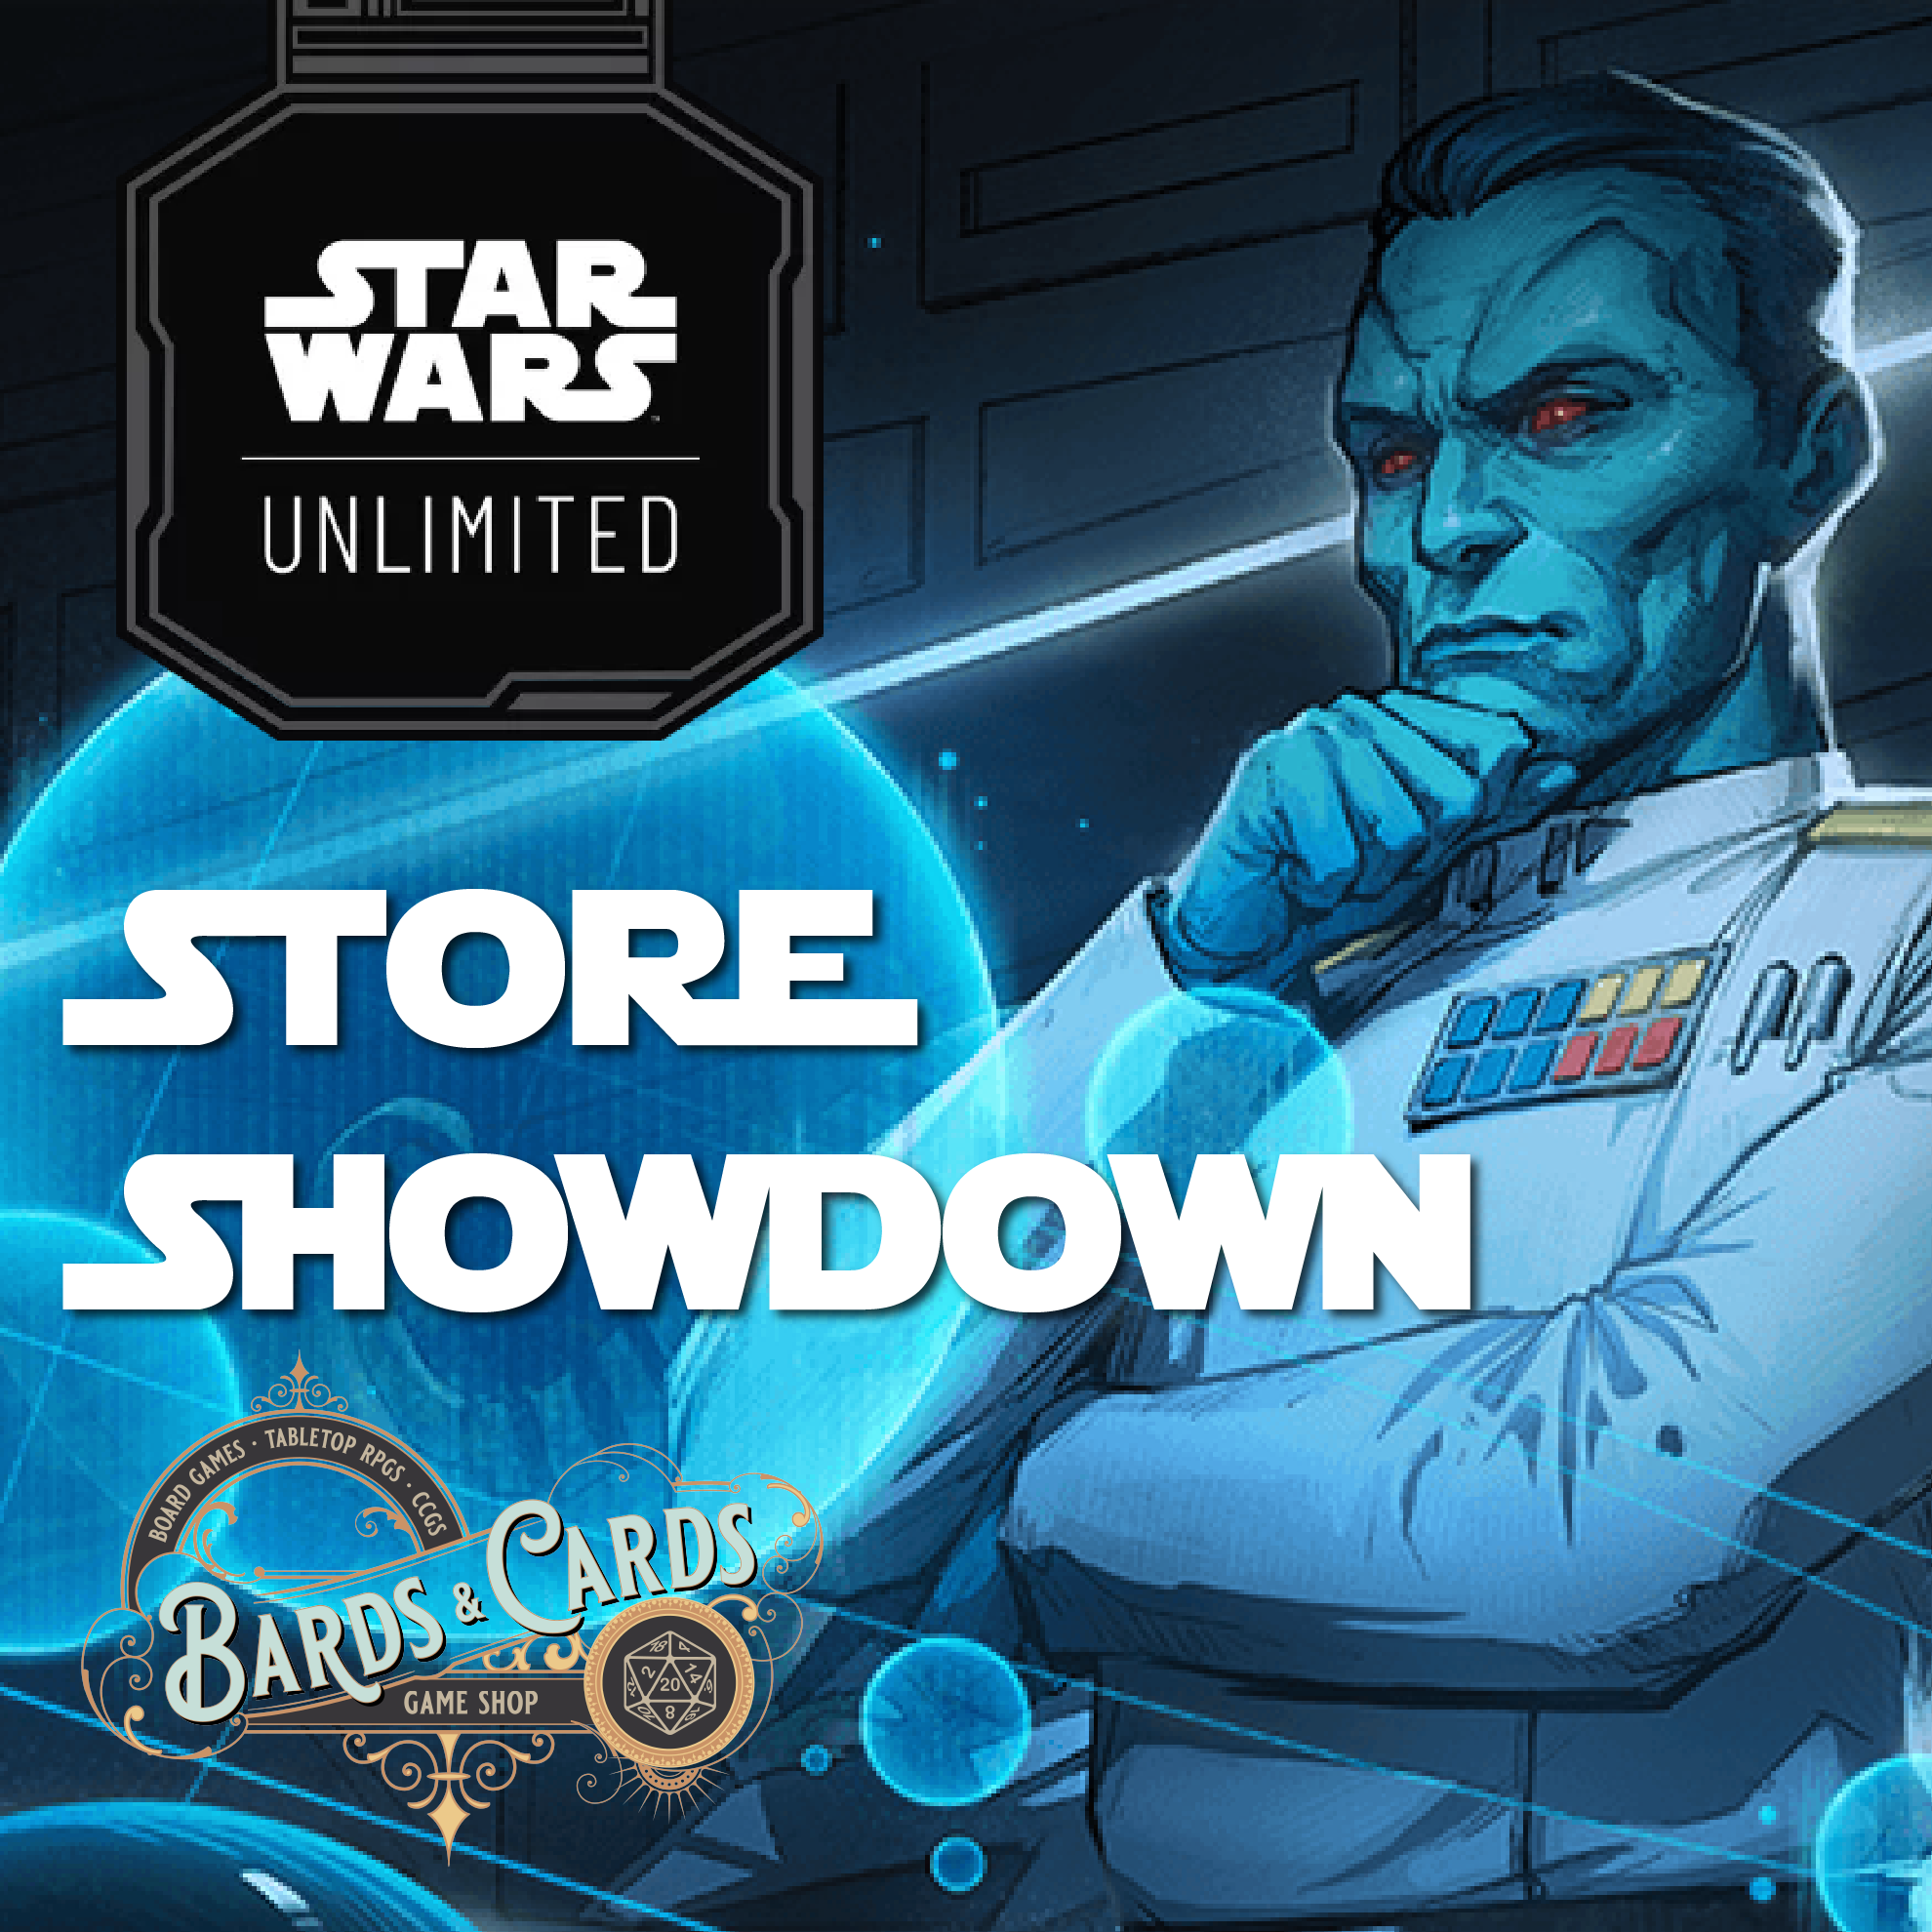 5/23/2024, 6 pm - Star Wars: Unlimited Store Showdown - Bards & Cards